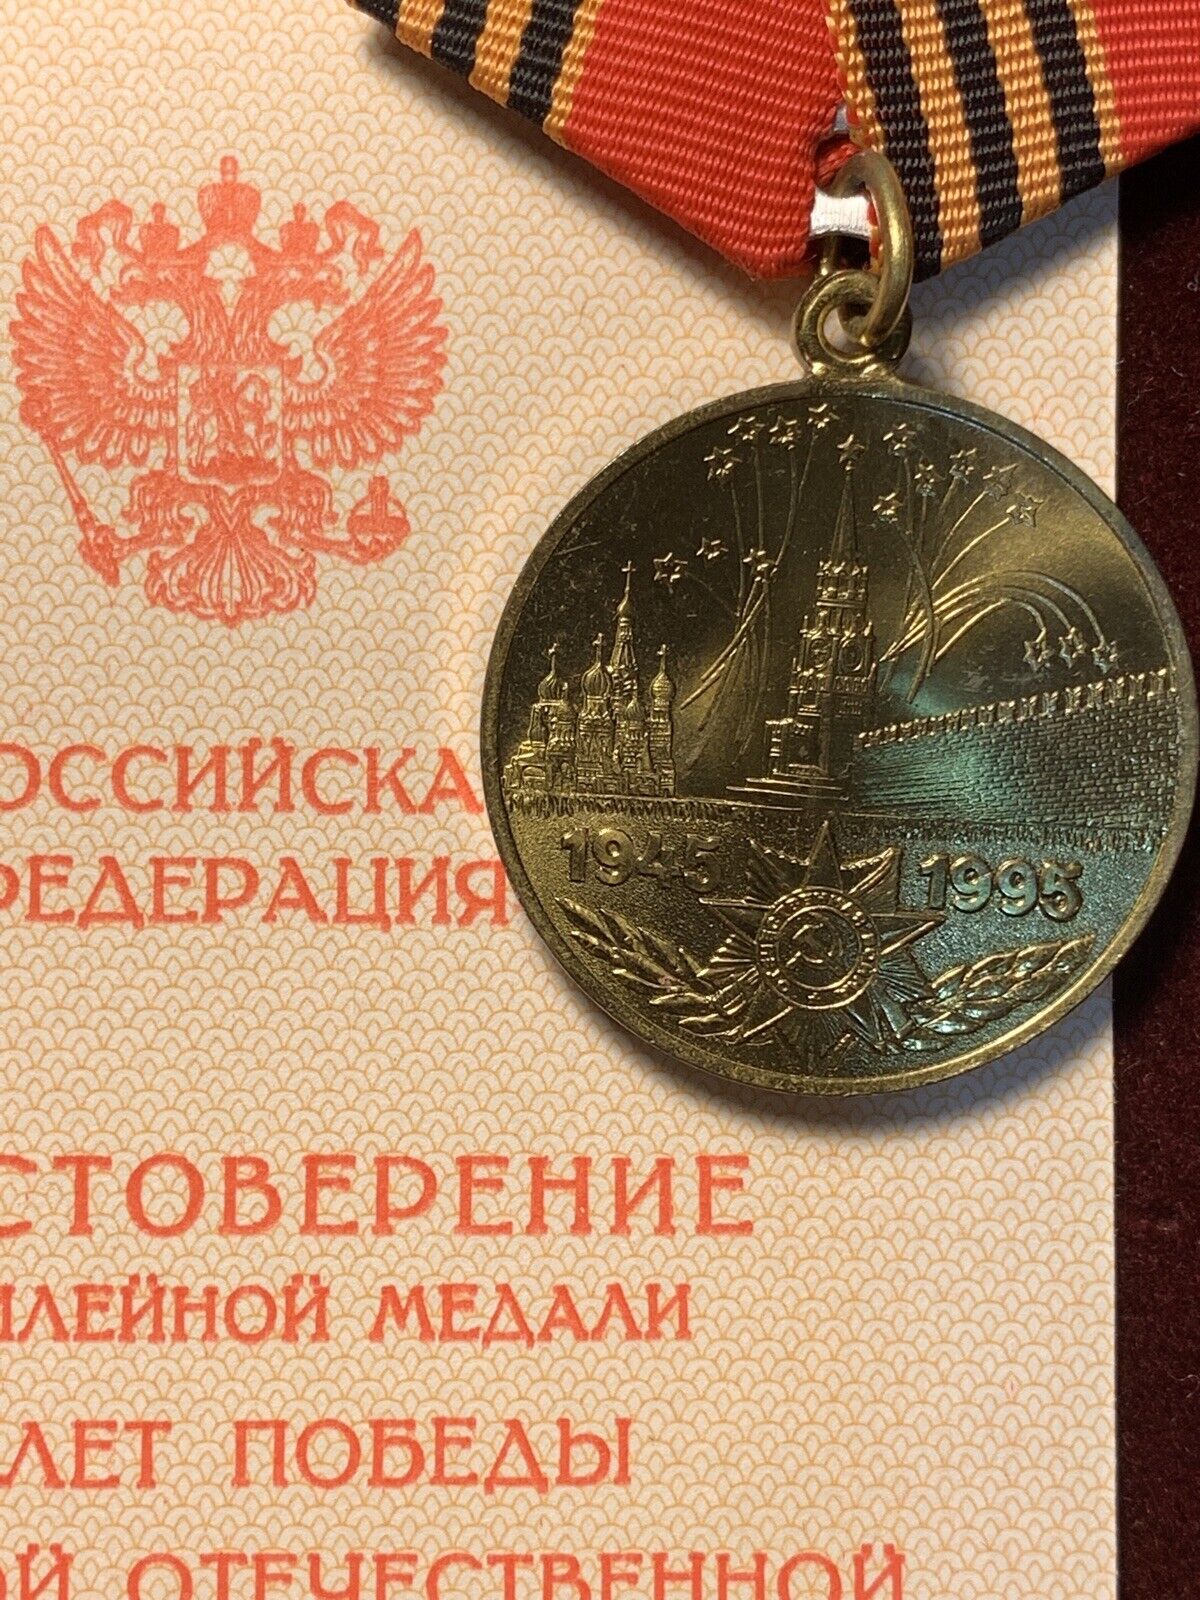 The 50th Anniversary of the VICTORY in The Great Patriotic War 1941- 1945 Medal.